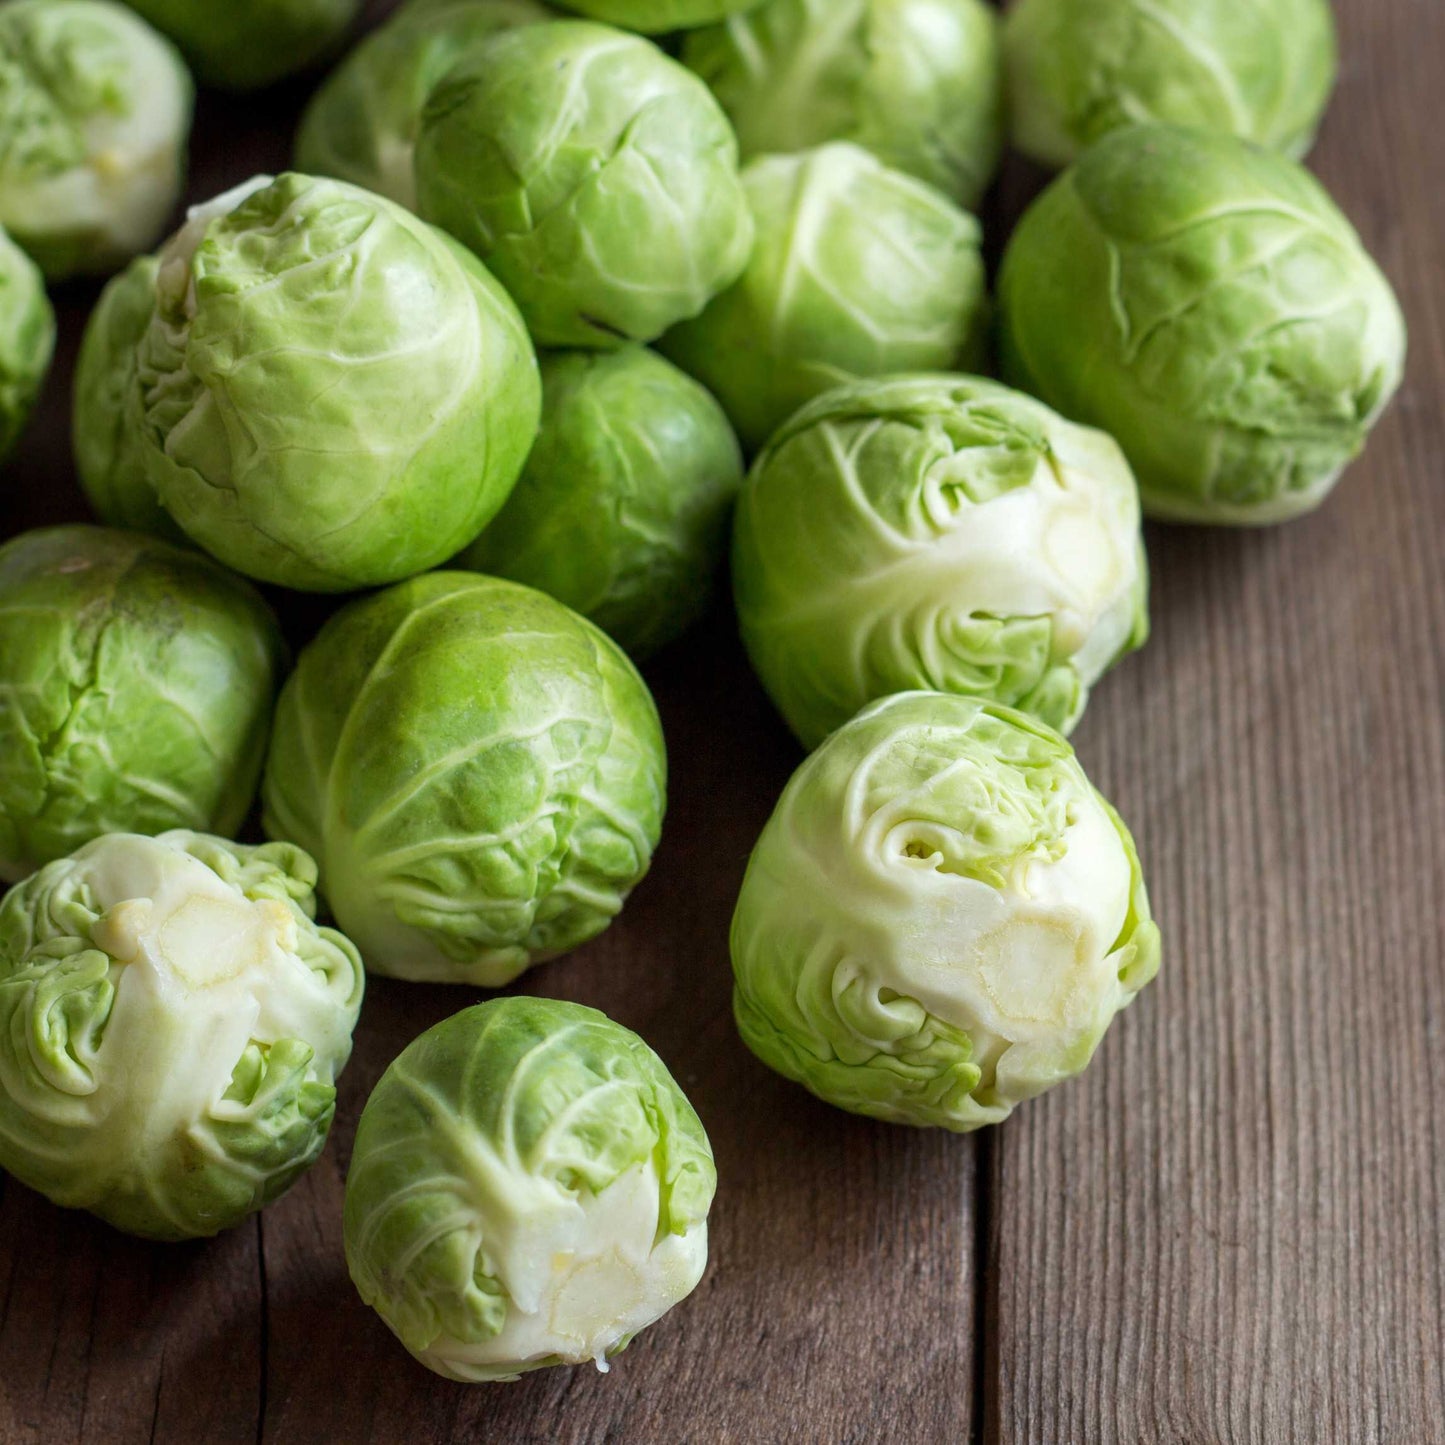 50Pcs Organic Brussels Sprout Seeds